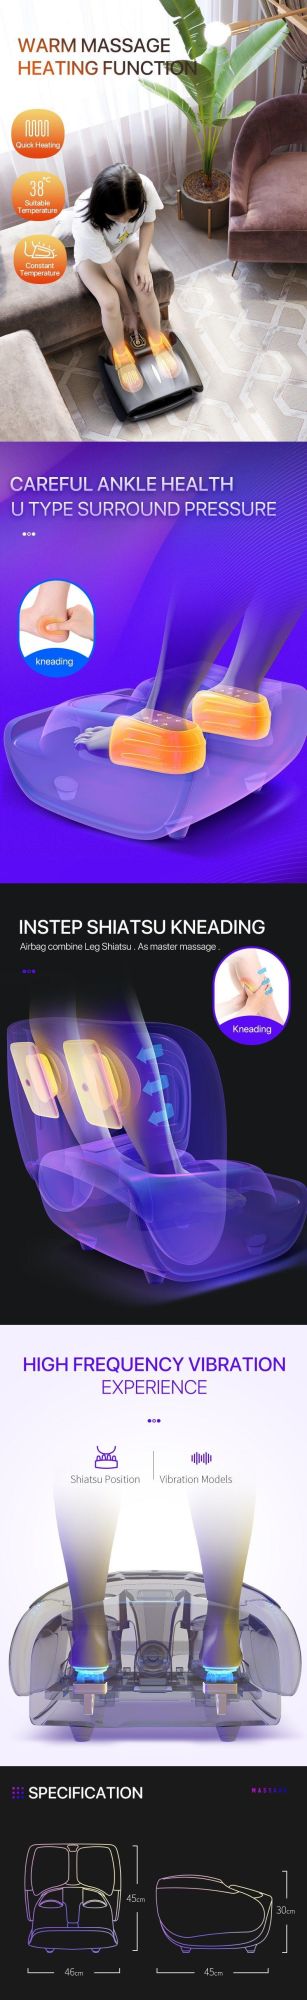 Vital Care Shiatsu Massage Machine a More Ultimate with Vibration Leg and Full Set Chair SPA Low Frequency Foot Massager